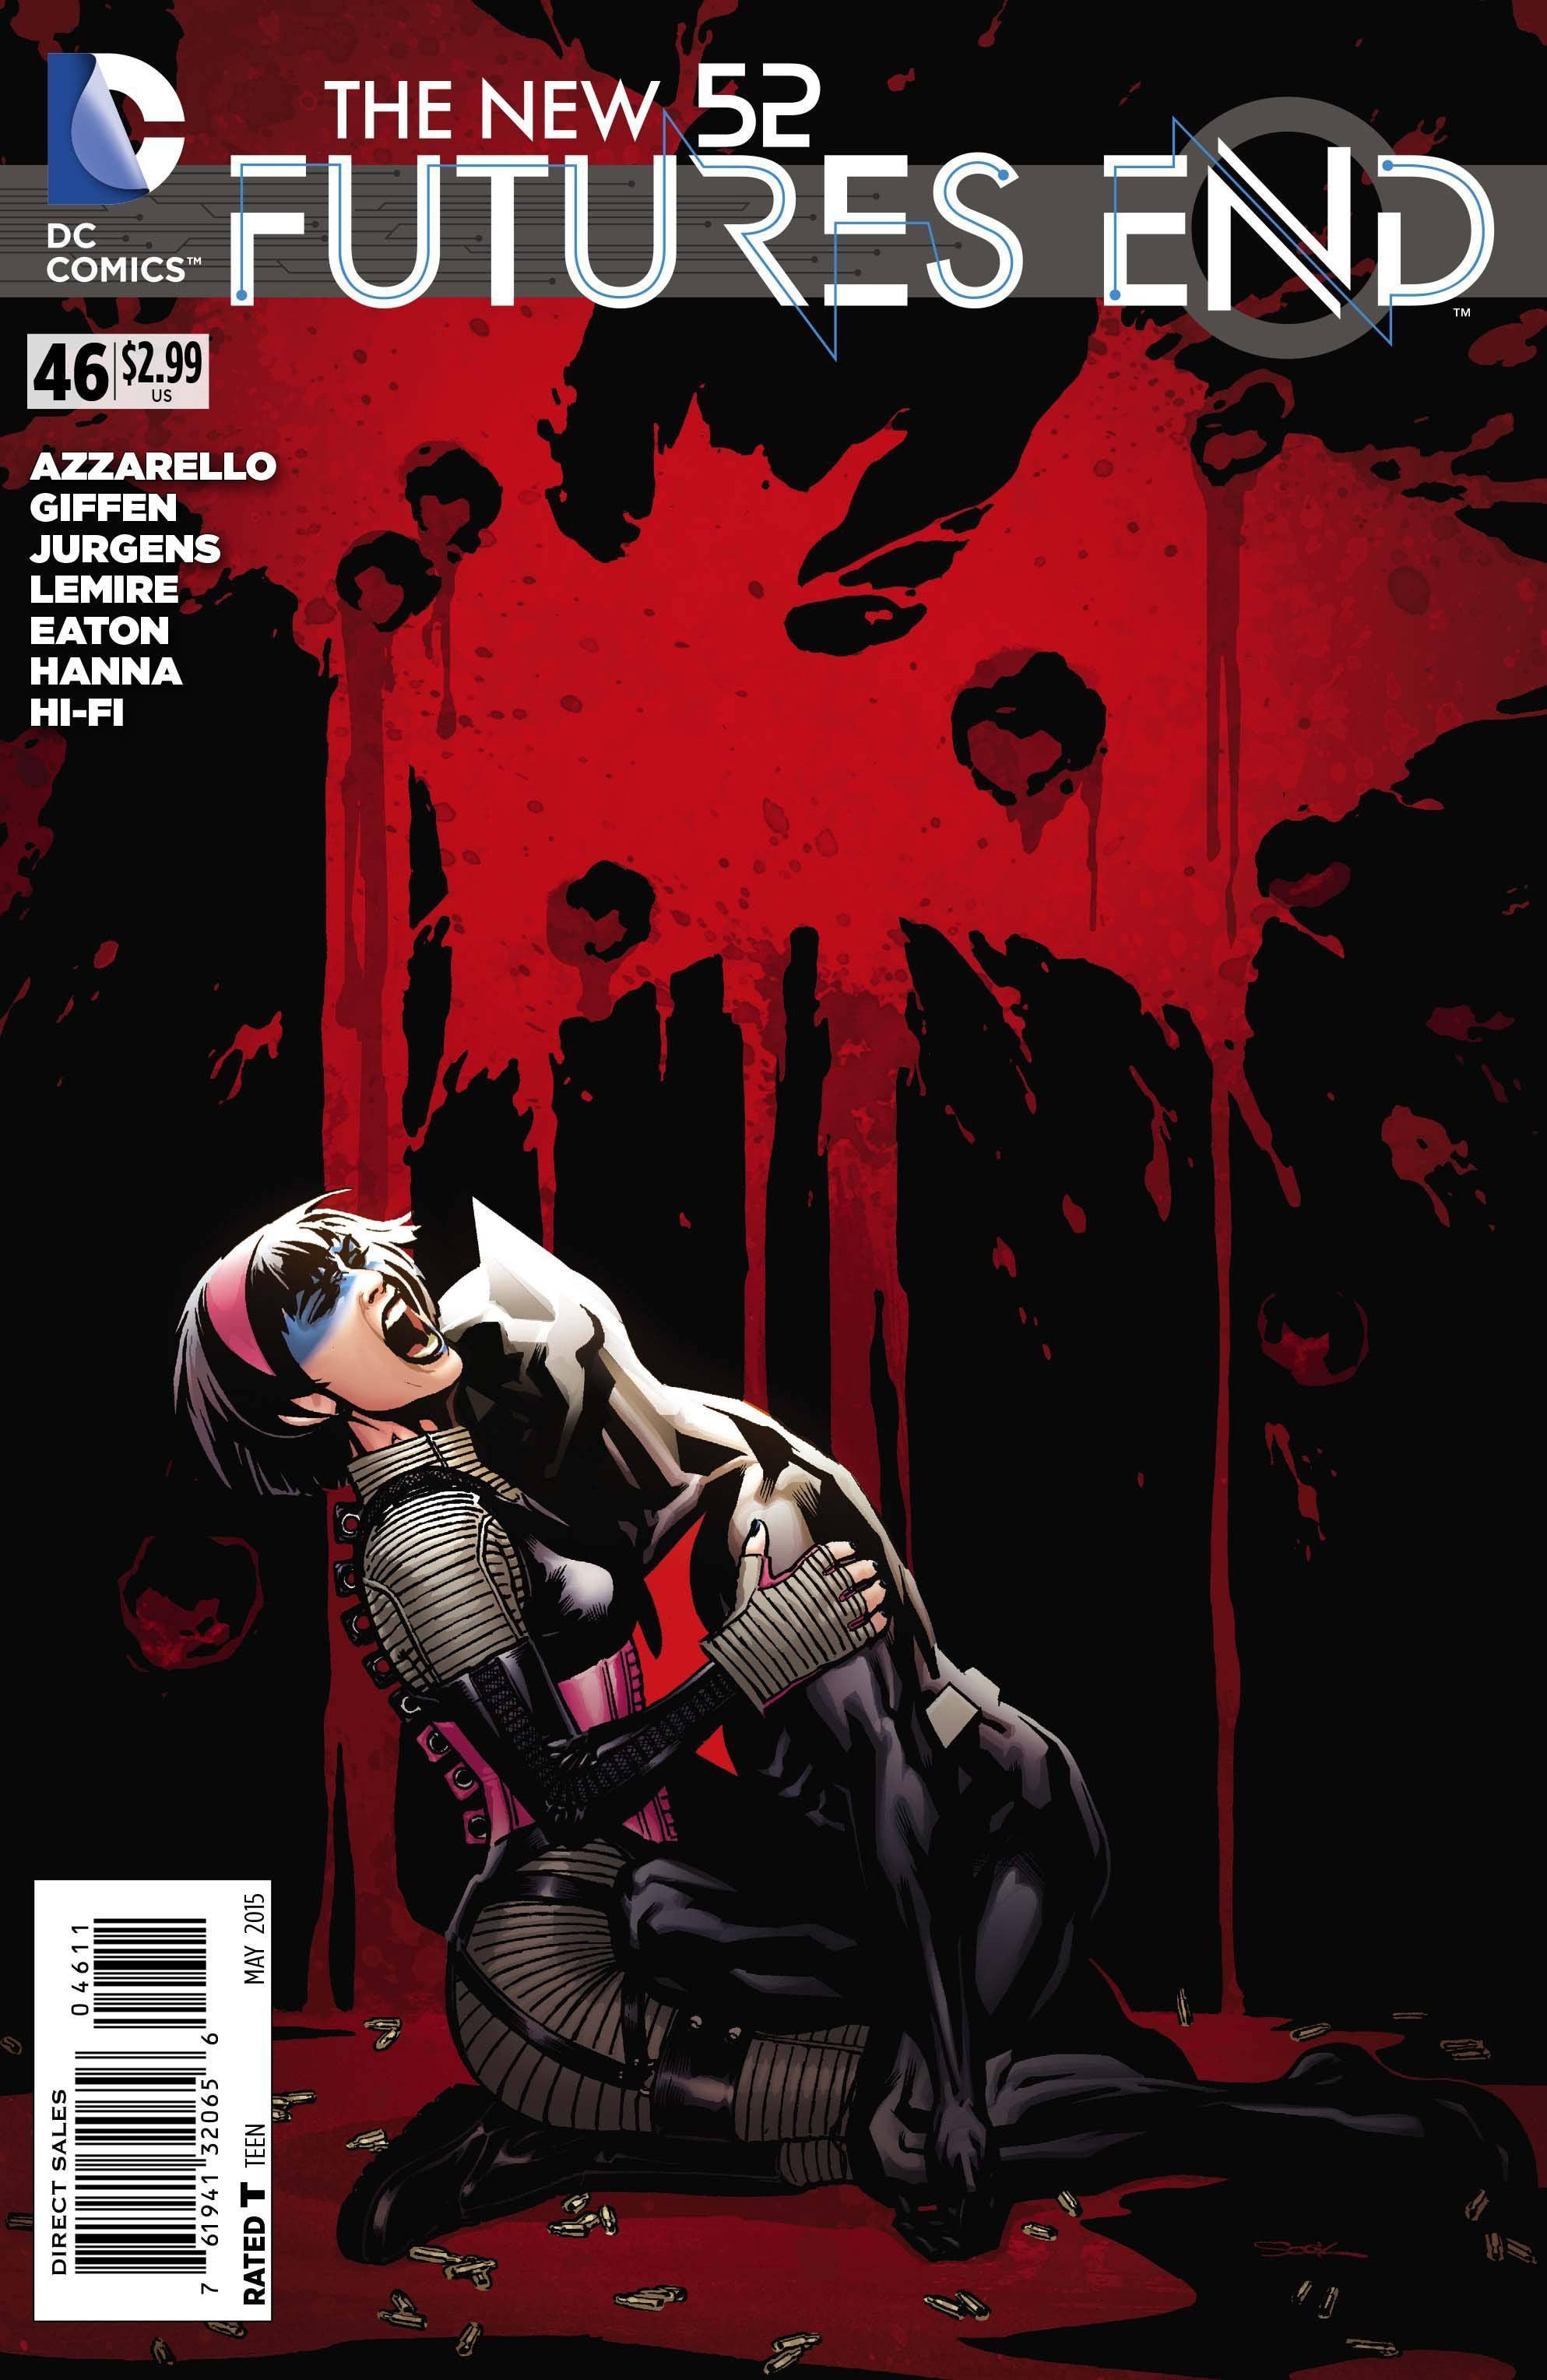 NEW 52 FUTURES END #46 (WEEKLY) - Kings Comics